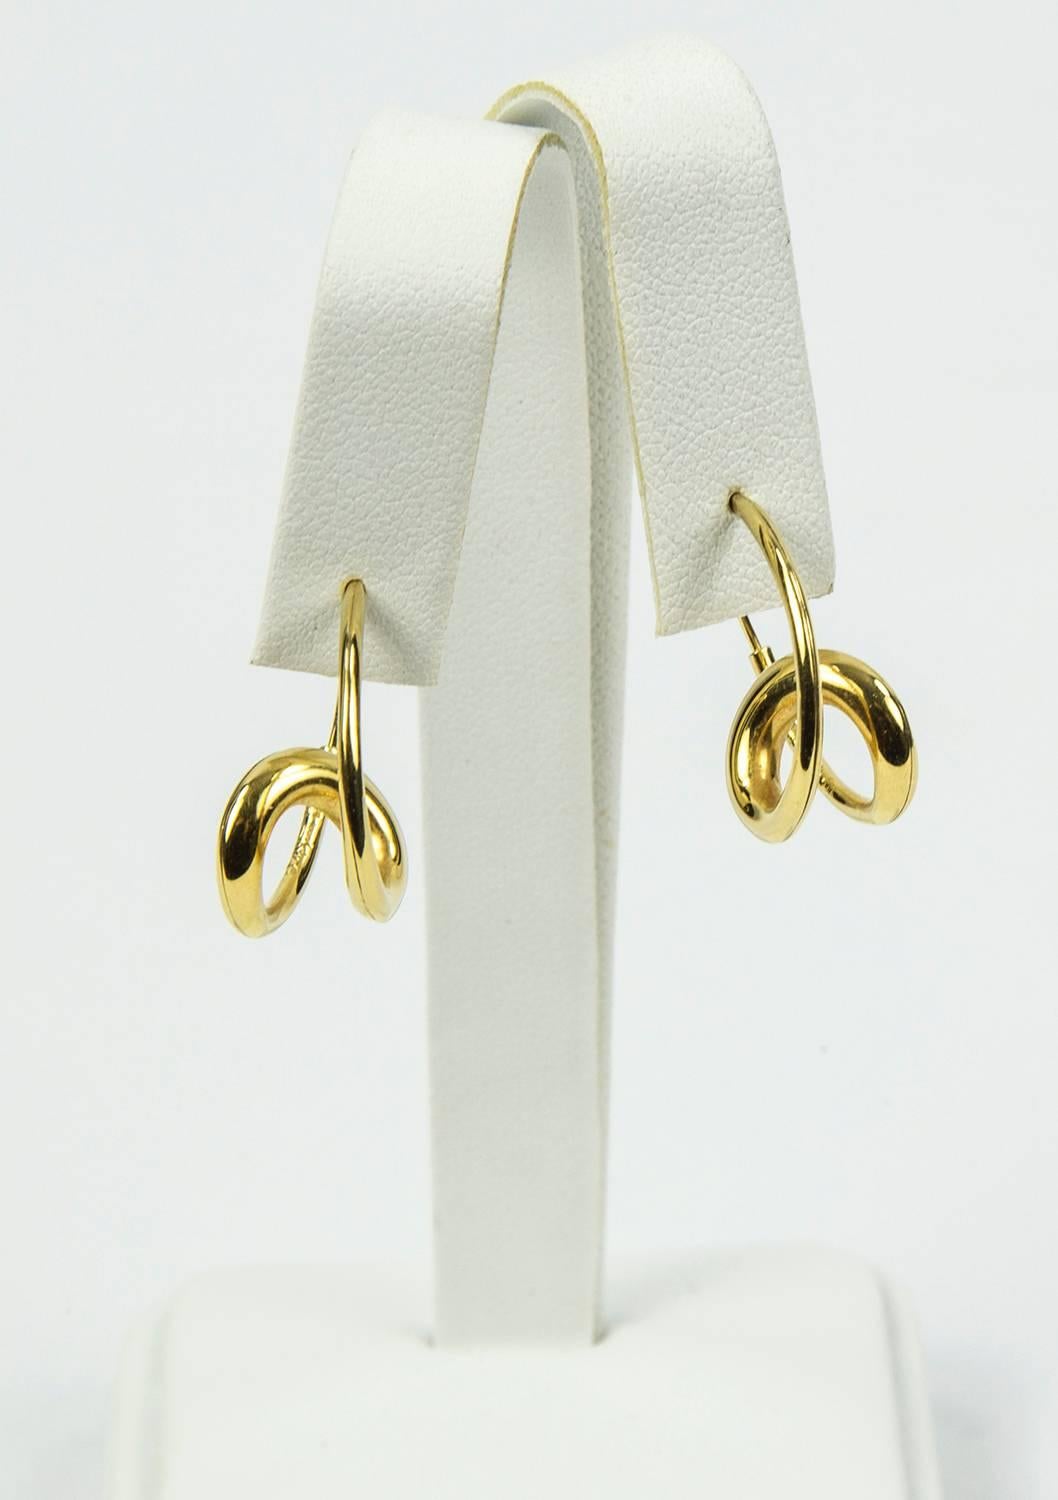 Exquisite handcrafted 18k Yellow Gold Single Loop Hoop Earrings Signed by Renowned Master Metal Smith, Michael Good are a twist on a modern classic. Created completely by hand, the goldsmith uses a hammer to compress and stretch precious metal into